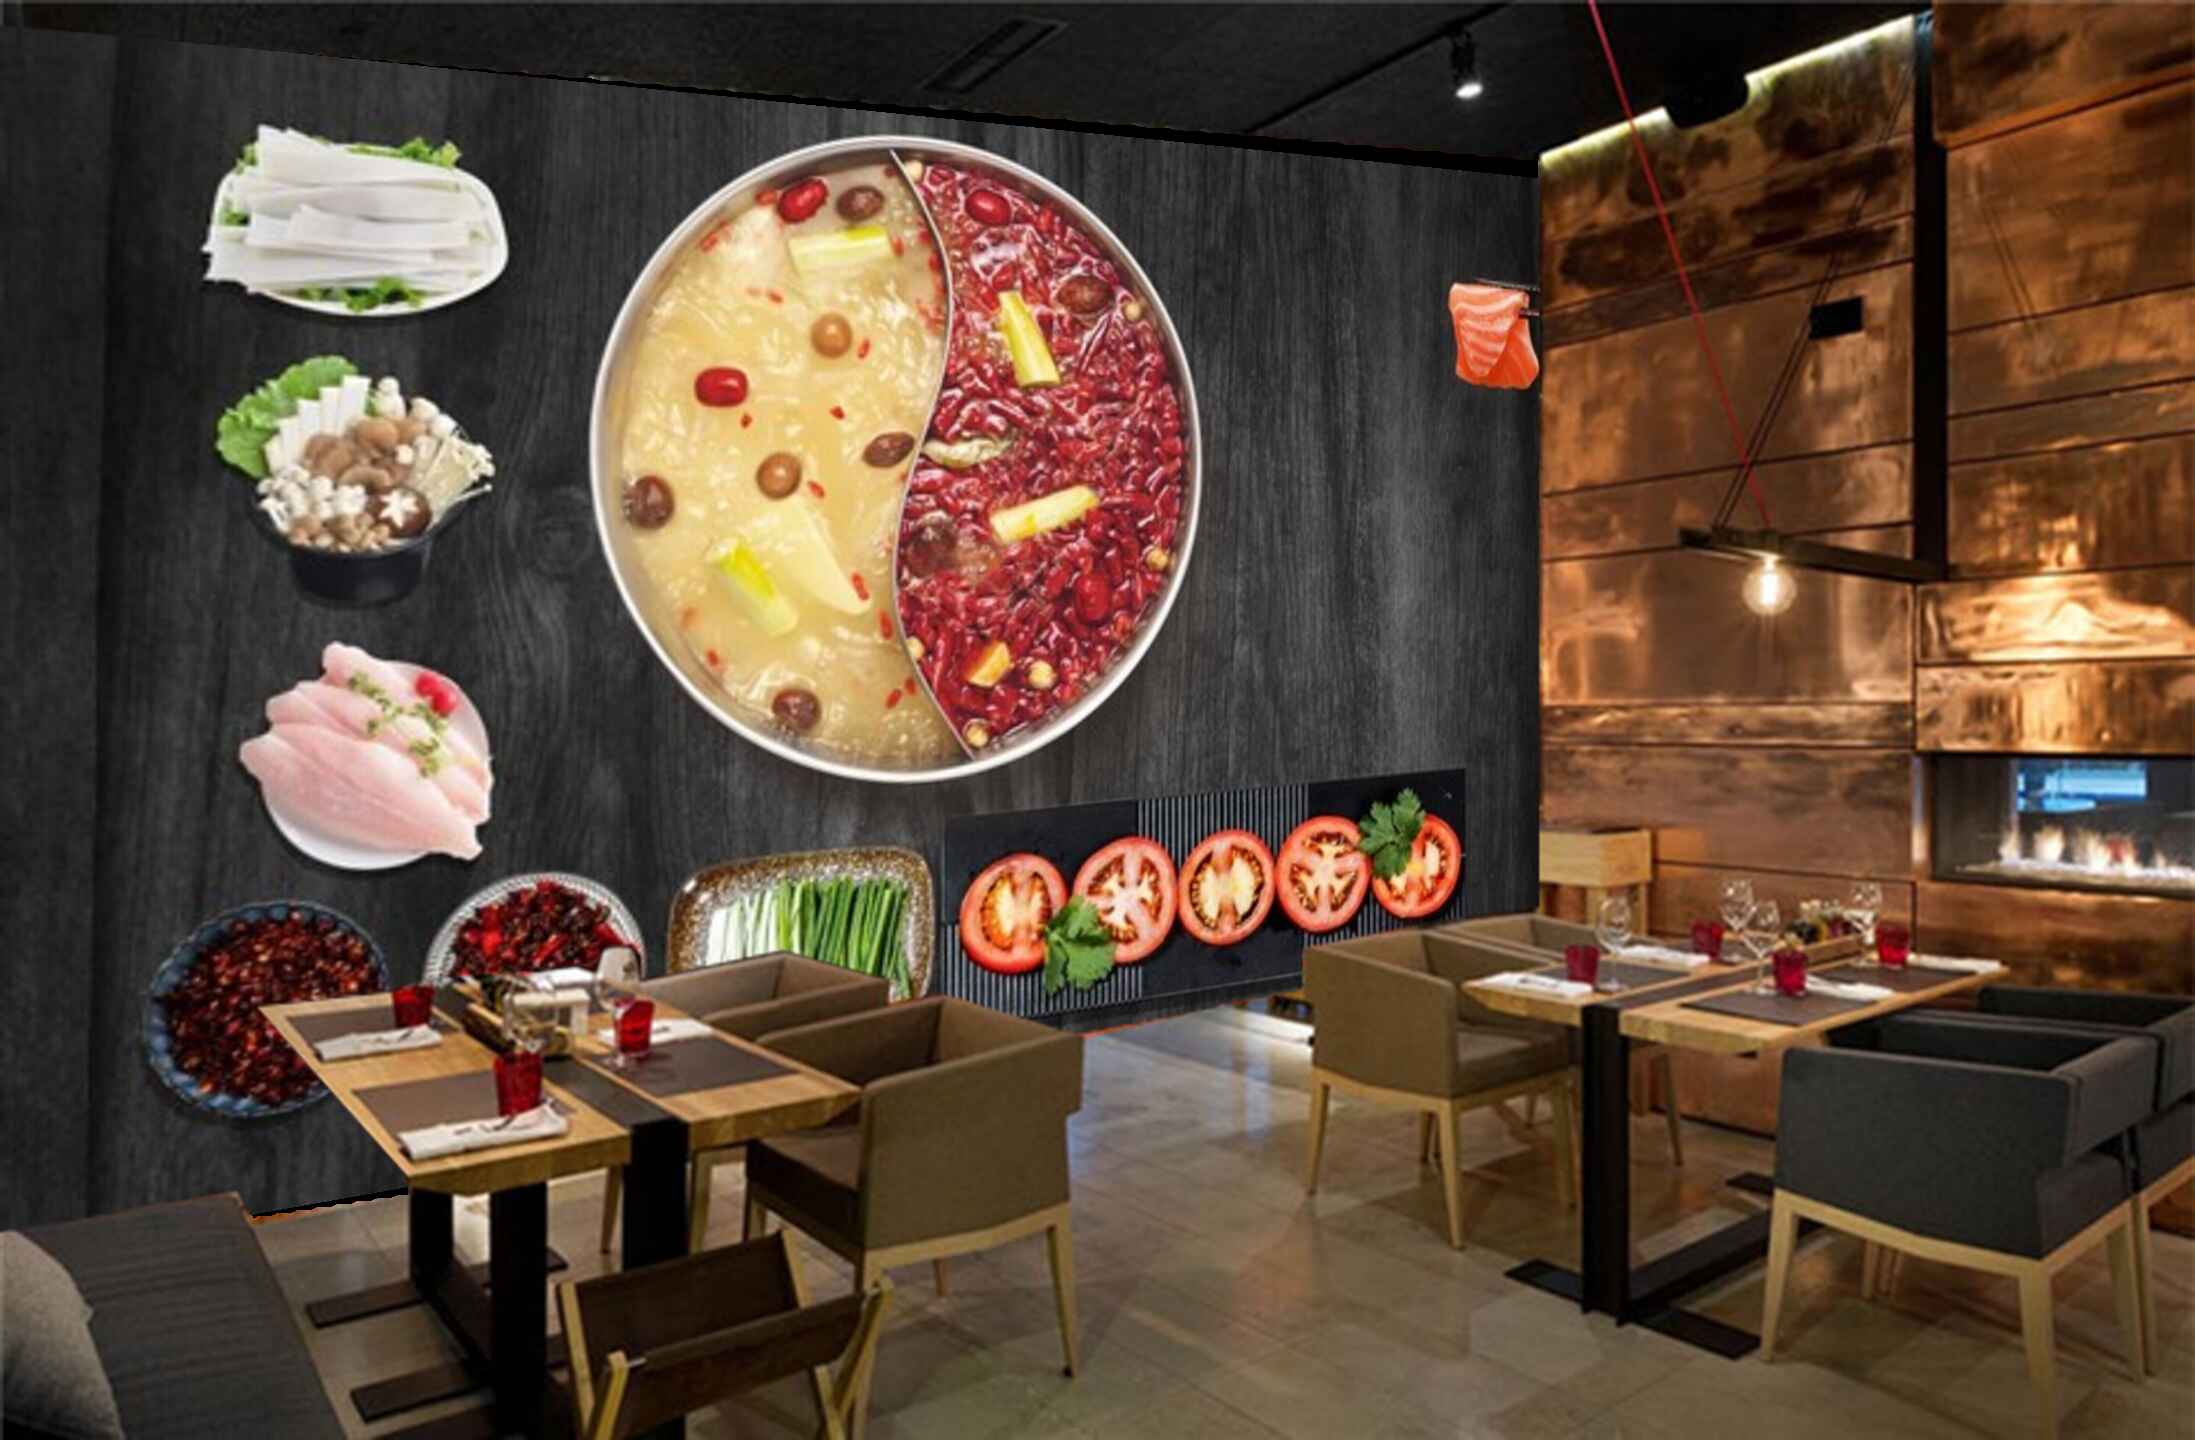 Avikalp MWZ3153 Hot Pot Tomatoes Meat Spices HD Wallpaper for Cafe Restaurant